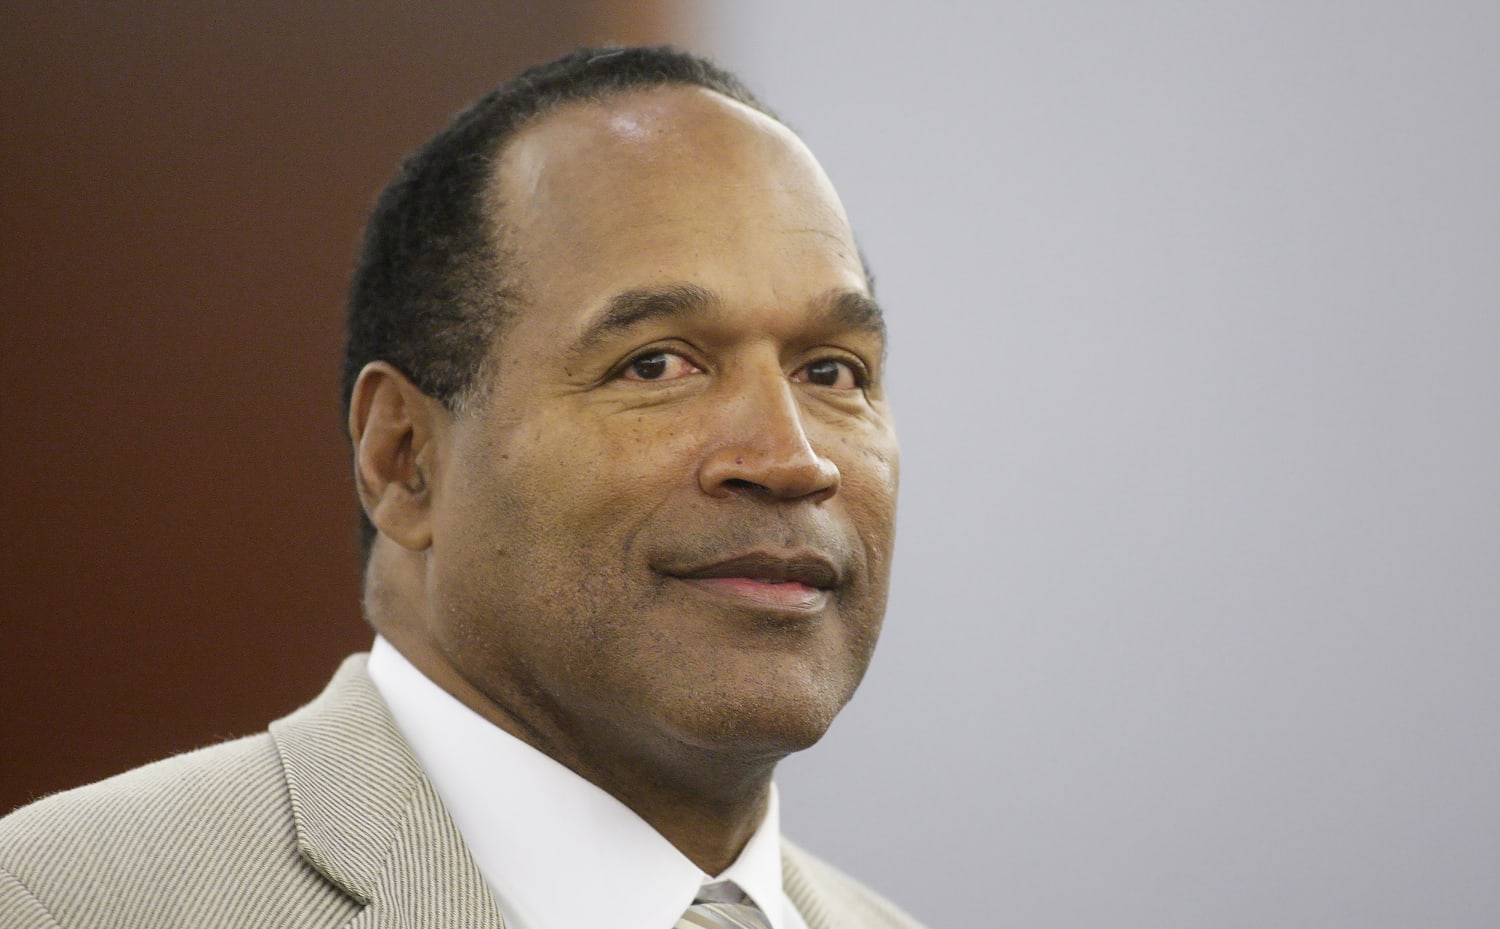 Where are O.J. Simpson's 5 kids now? What they said about their dad